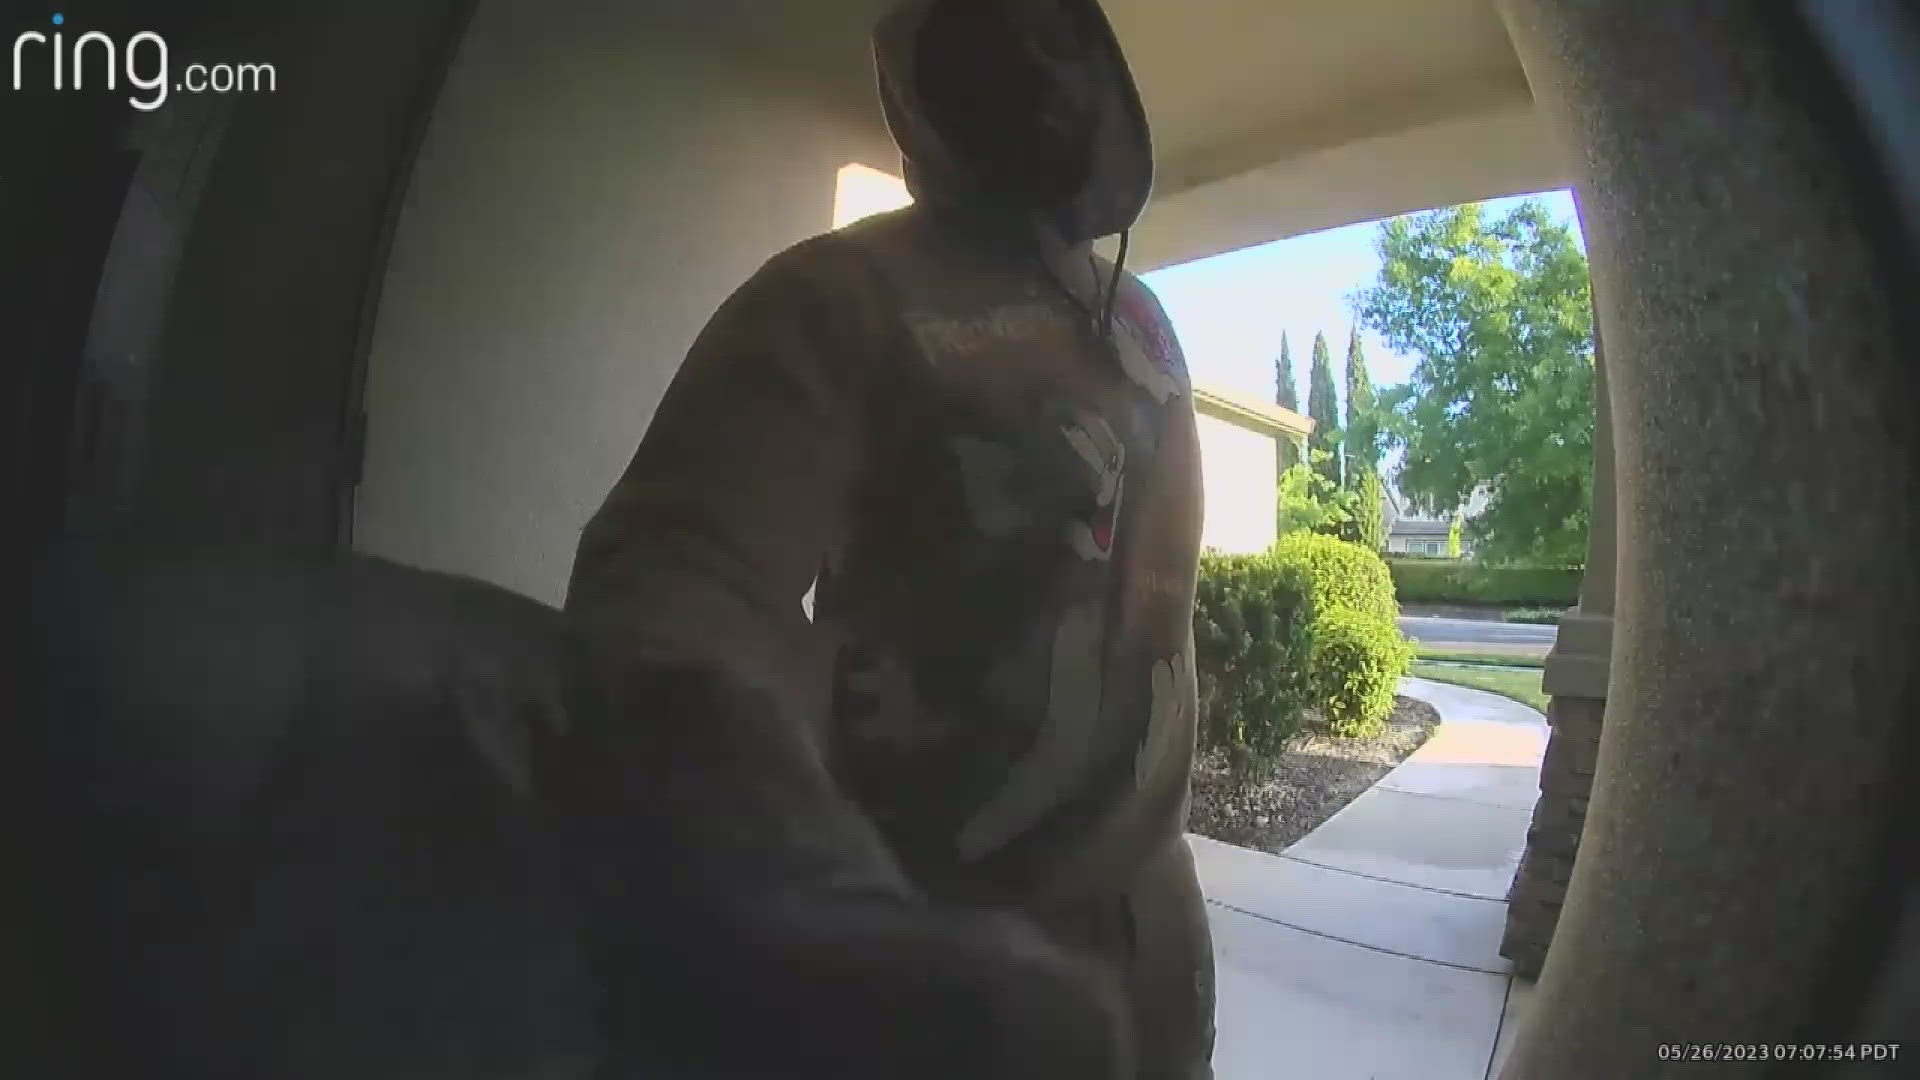 According to the homeowner, the burglar got away with jewelry, electronics and more.